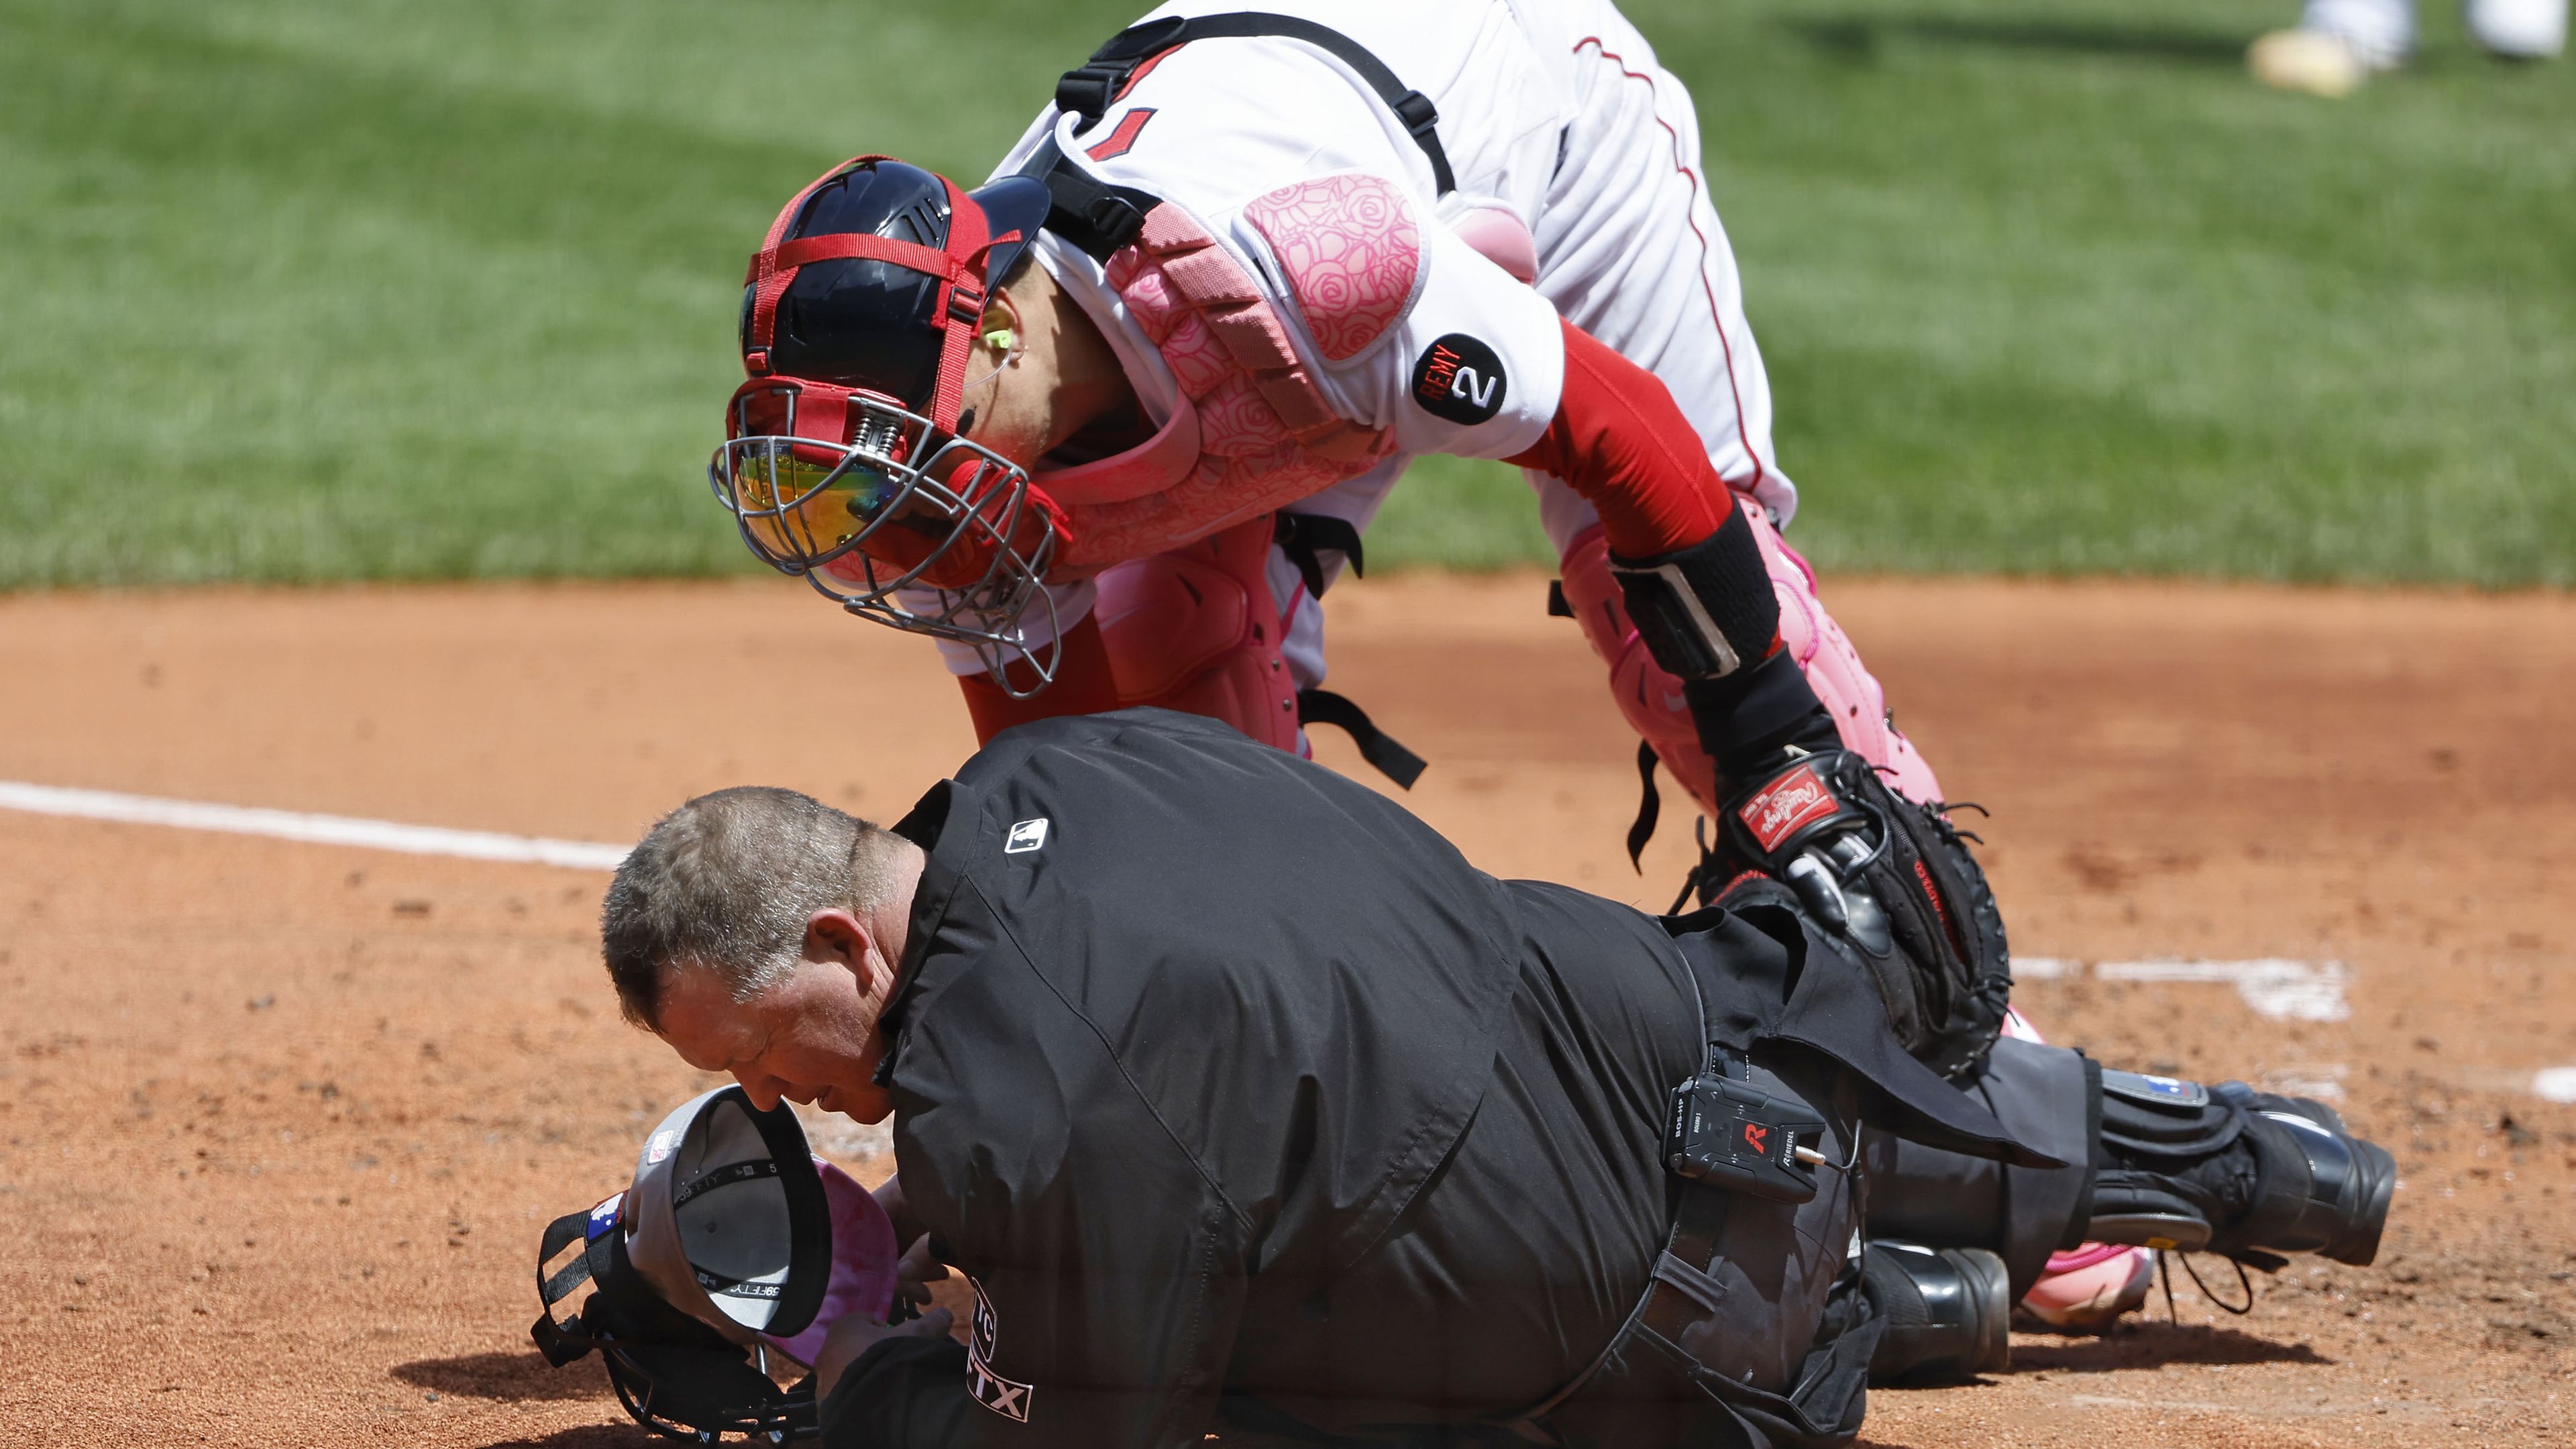 MLB umpire Ron Kulpa replaced after 20-minute delay after copping foul ball to the face